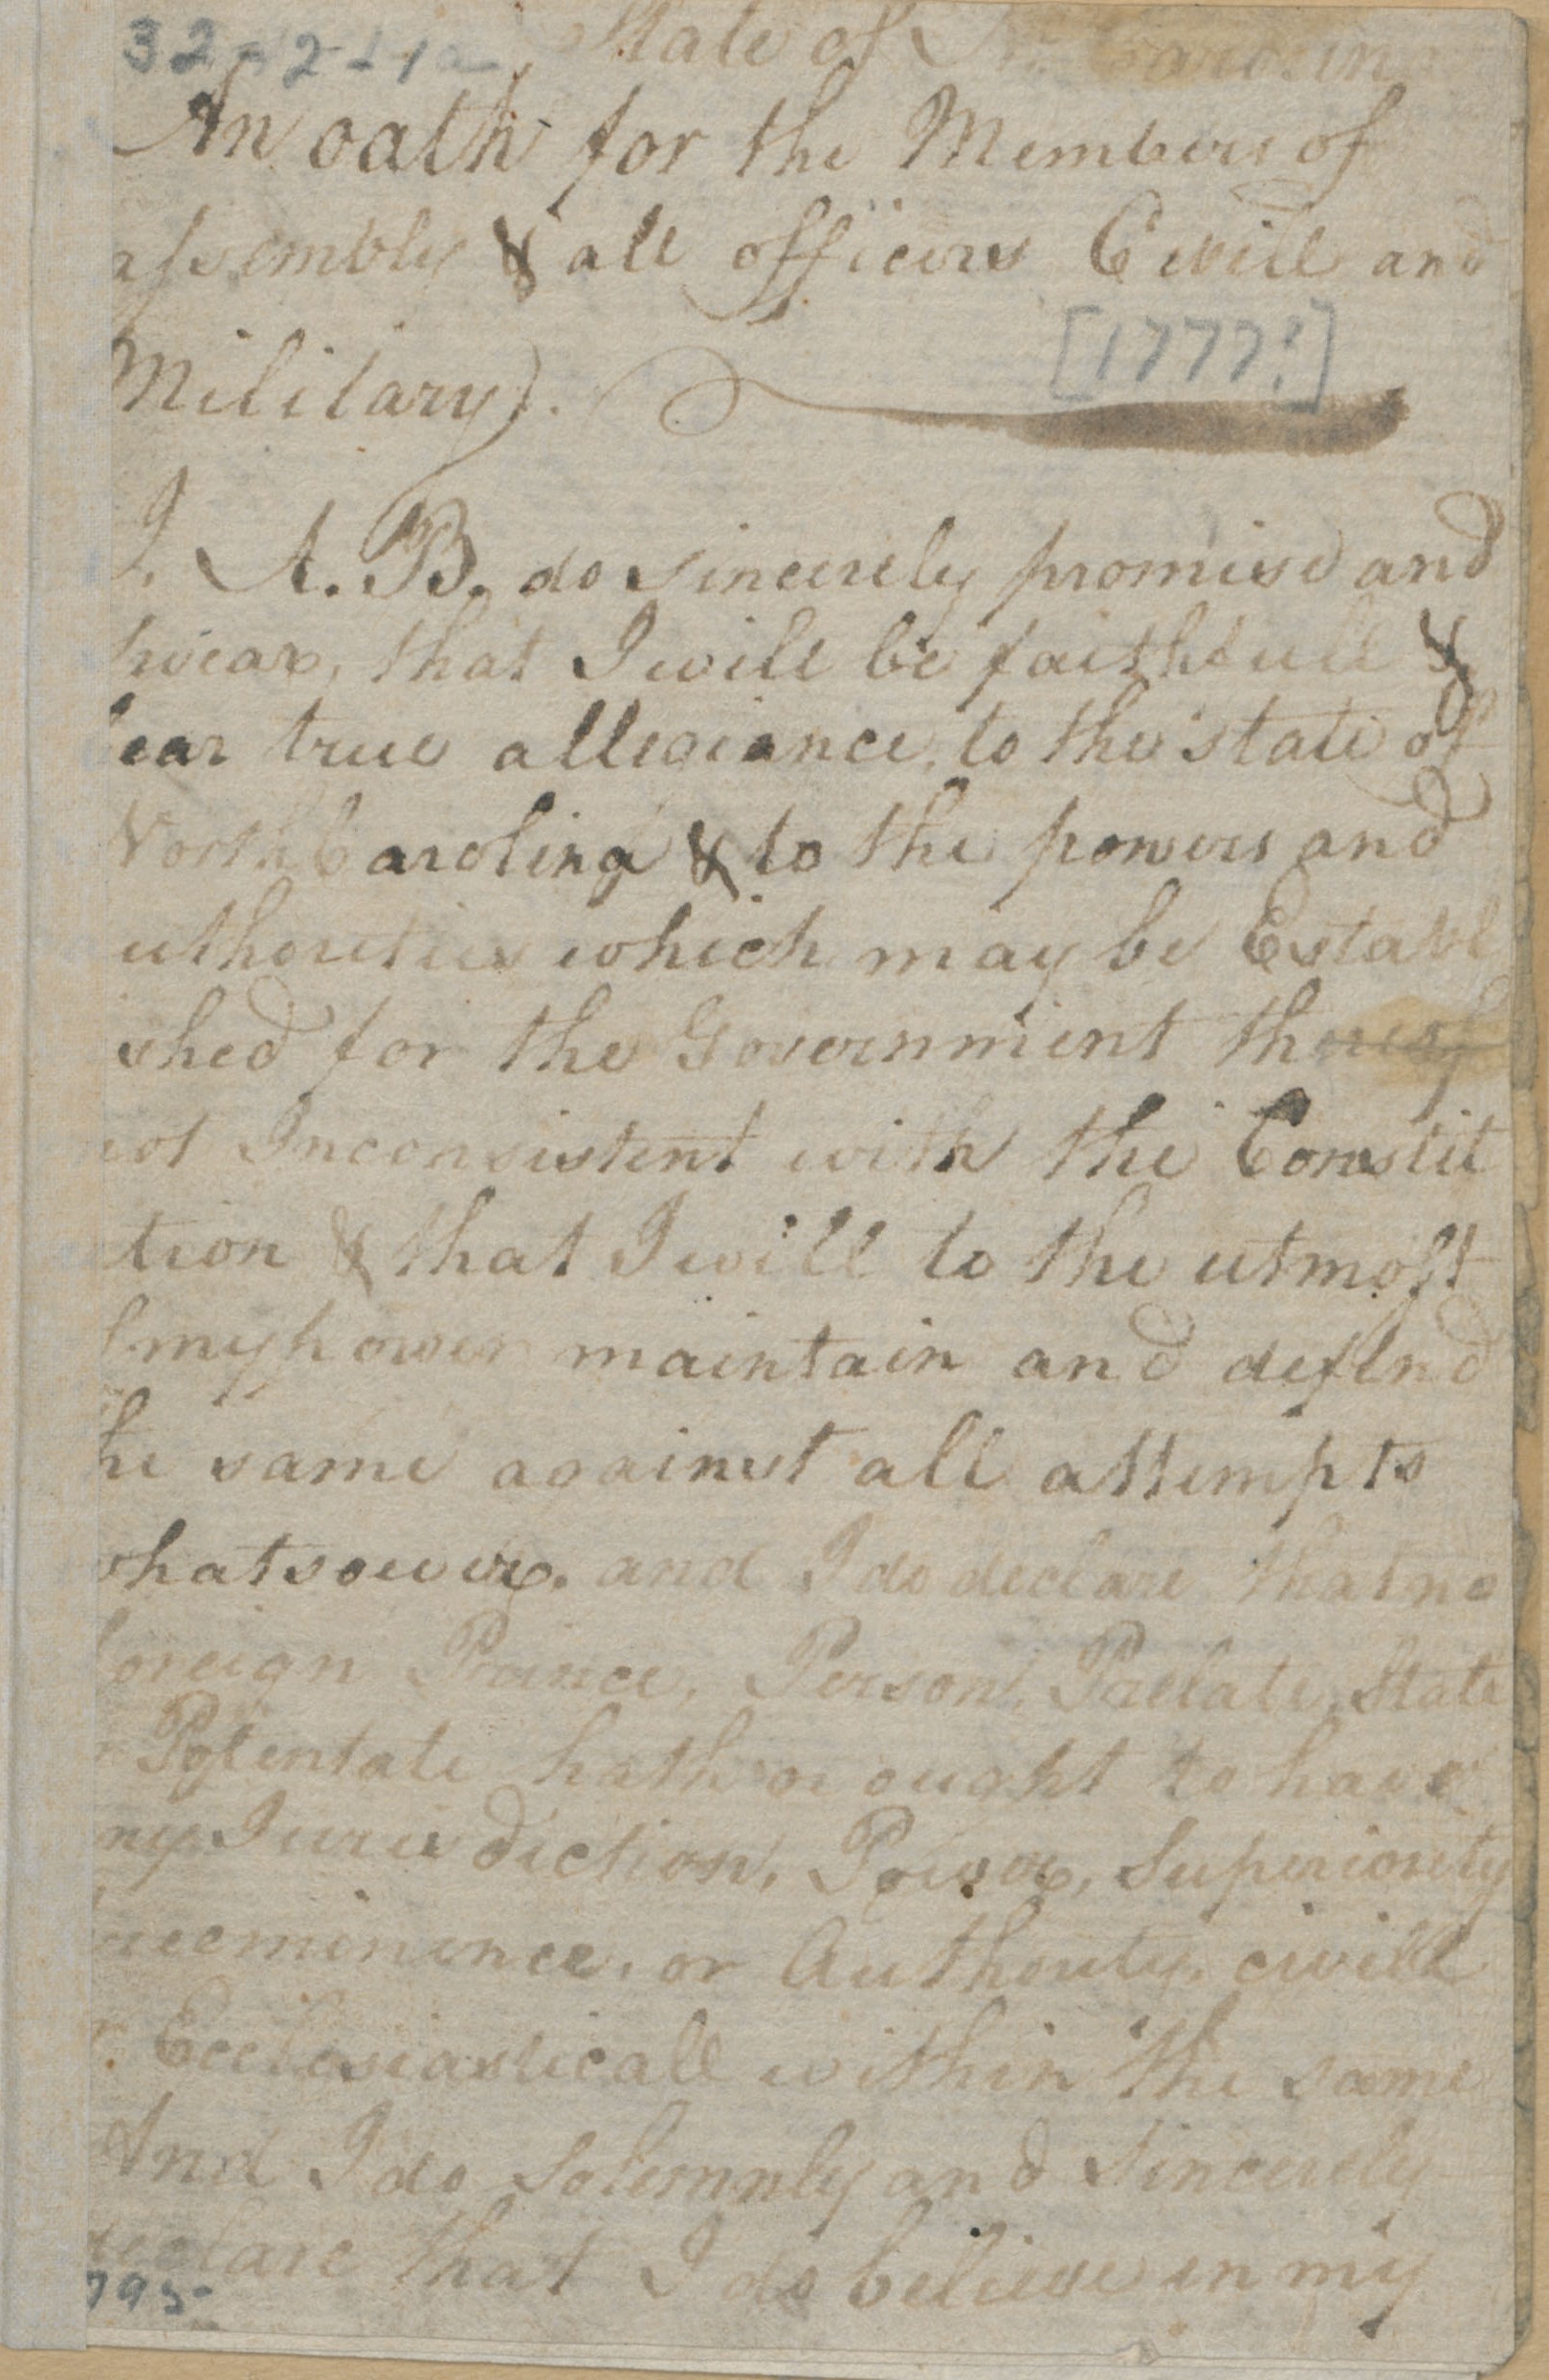 List of Civil and Military Officers Swearing the Oath of Allegiance to the State of North Carolina, circa 1777, page 1